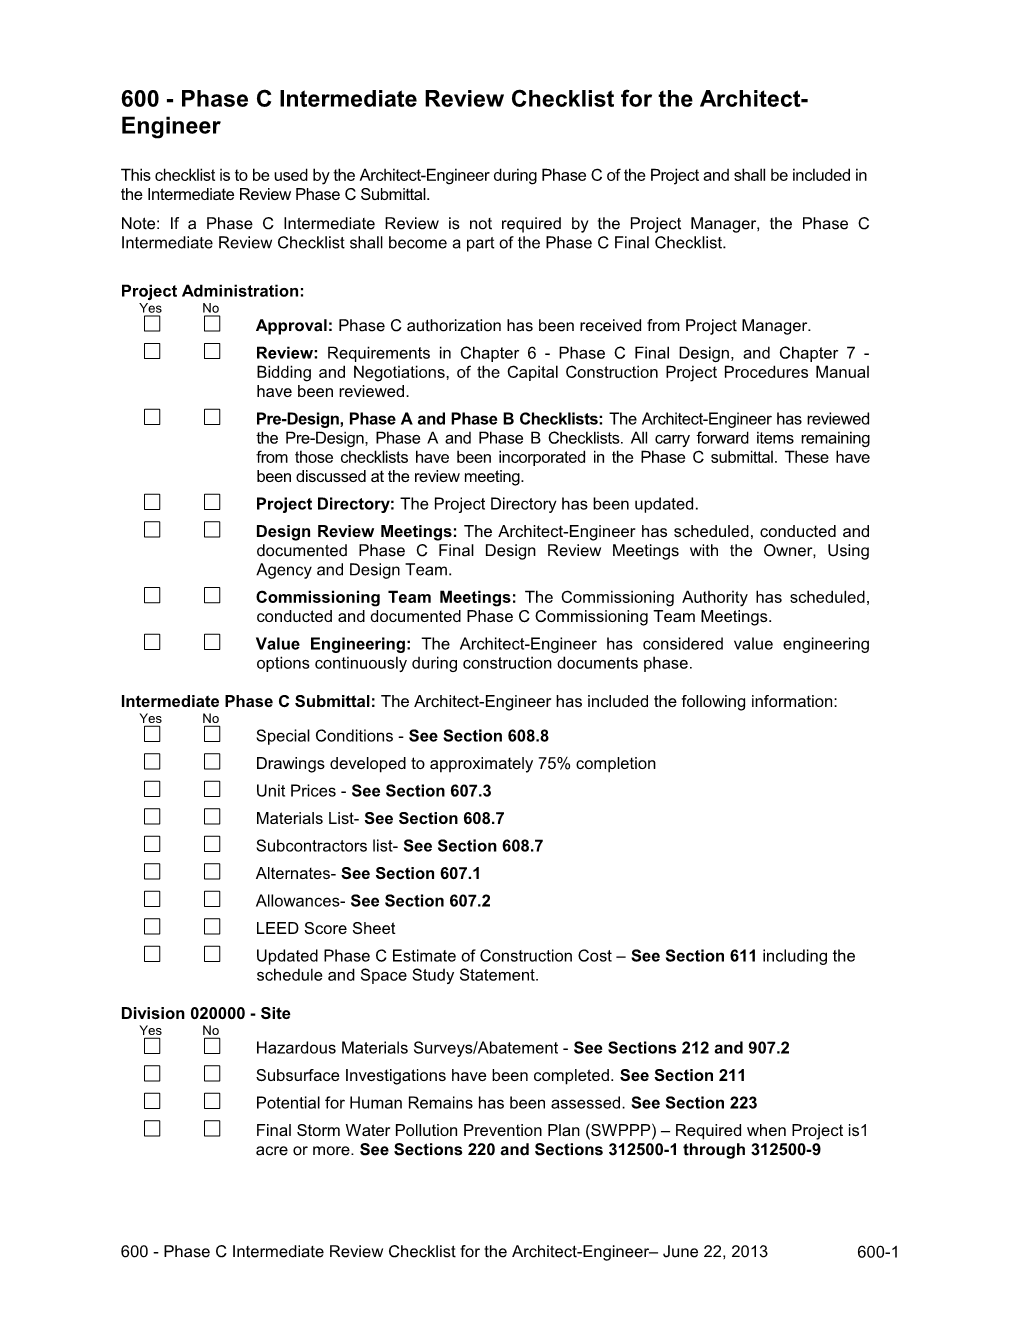 600- Phasec Intermediate Review Checklist for the Architect-Engineer